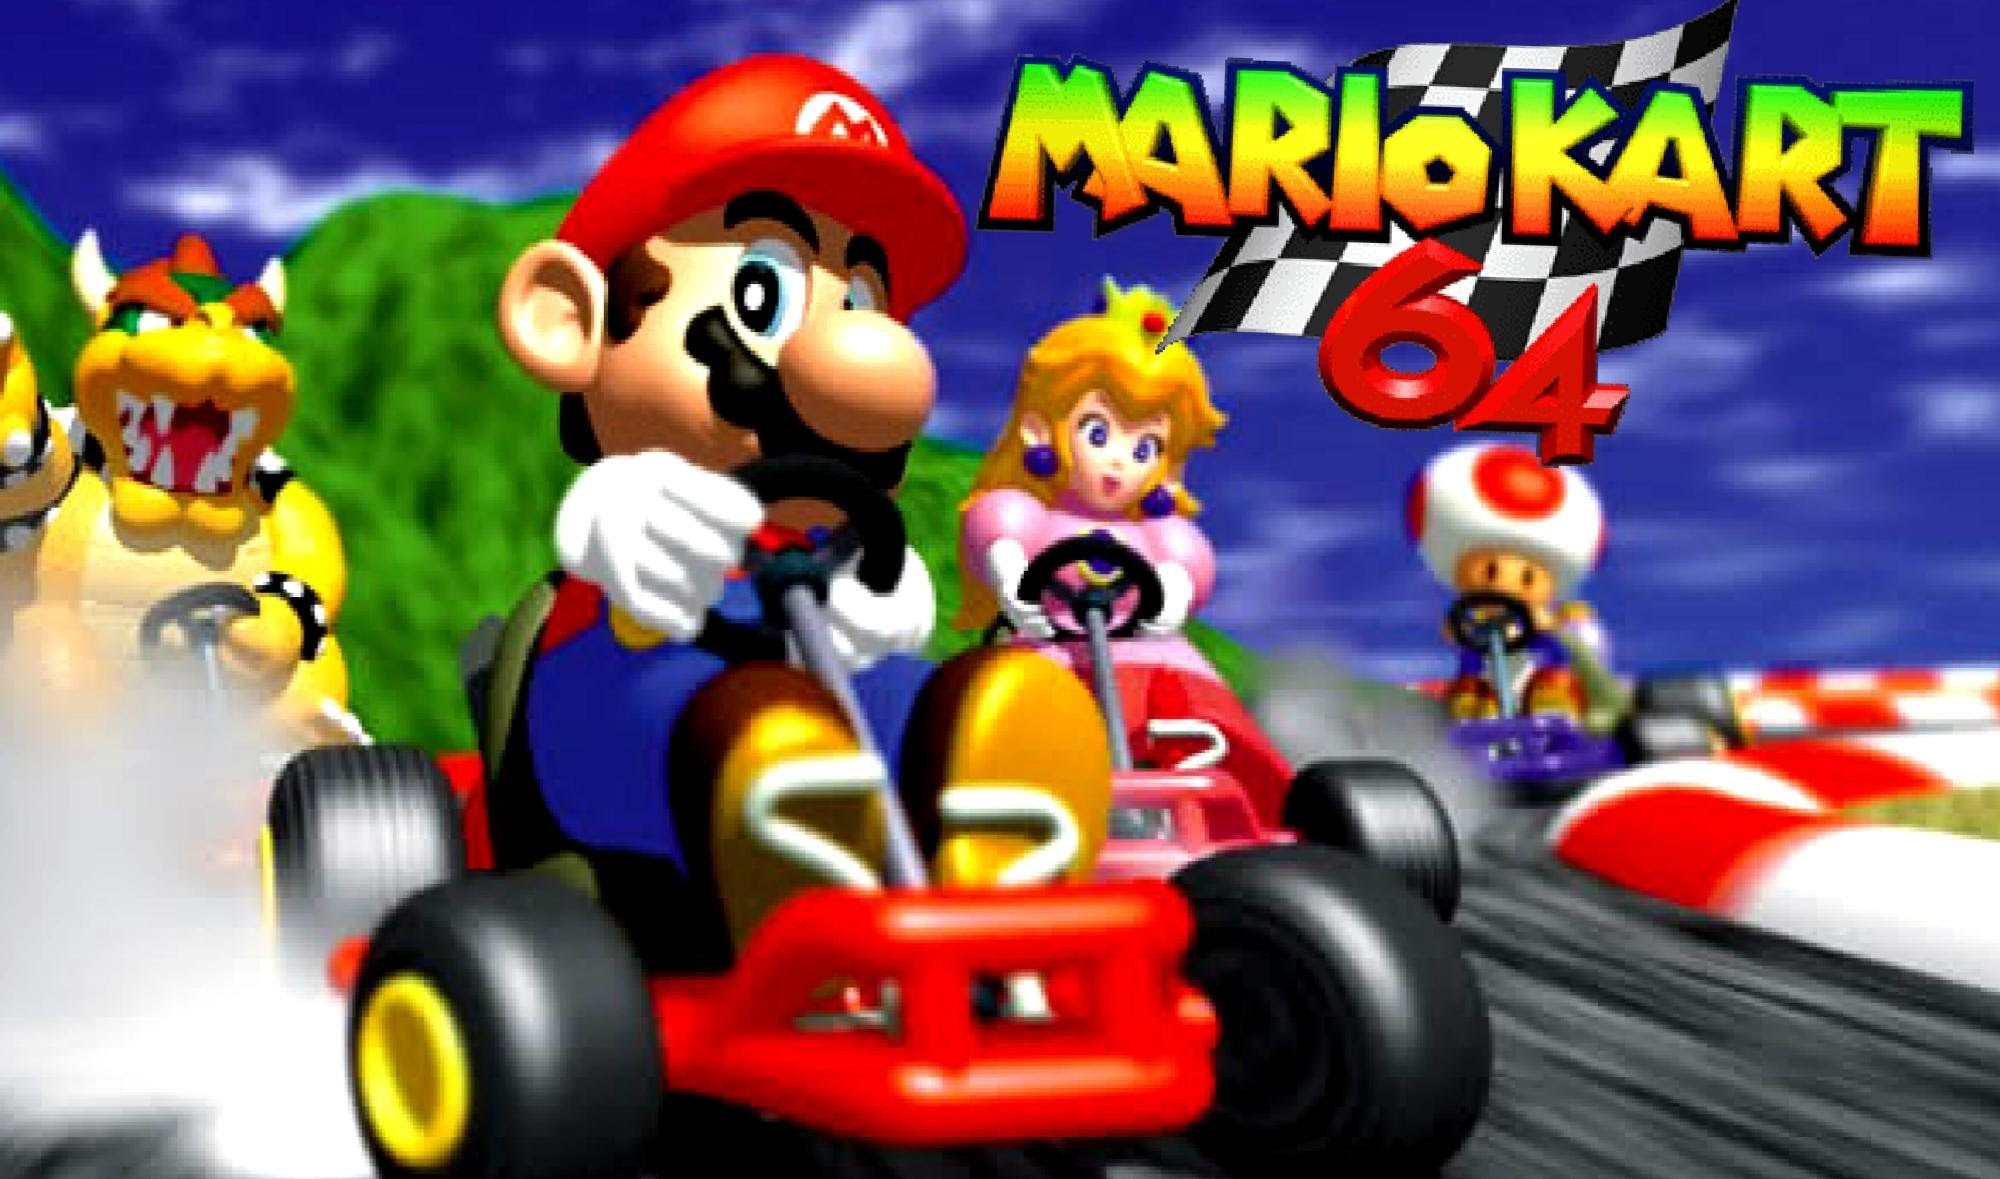 Nintendo 64 Classic Edition – 24 Games We Want to See on the System